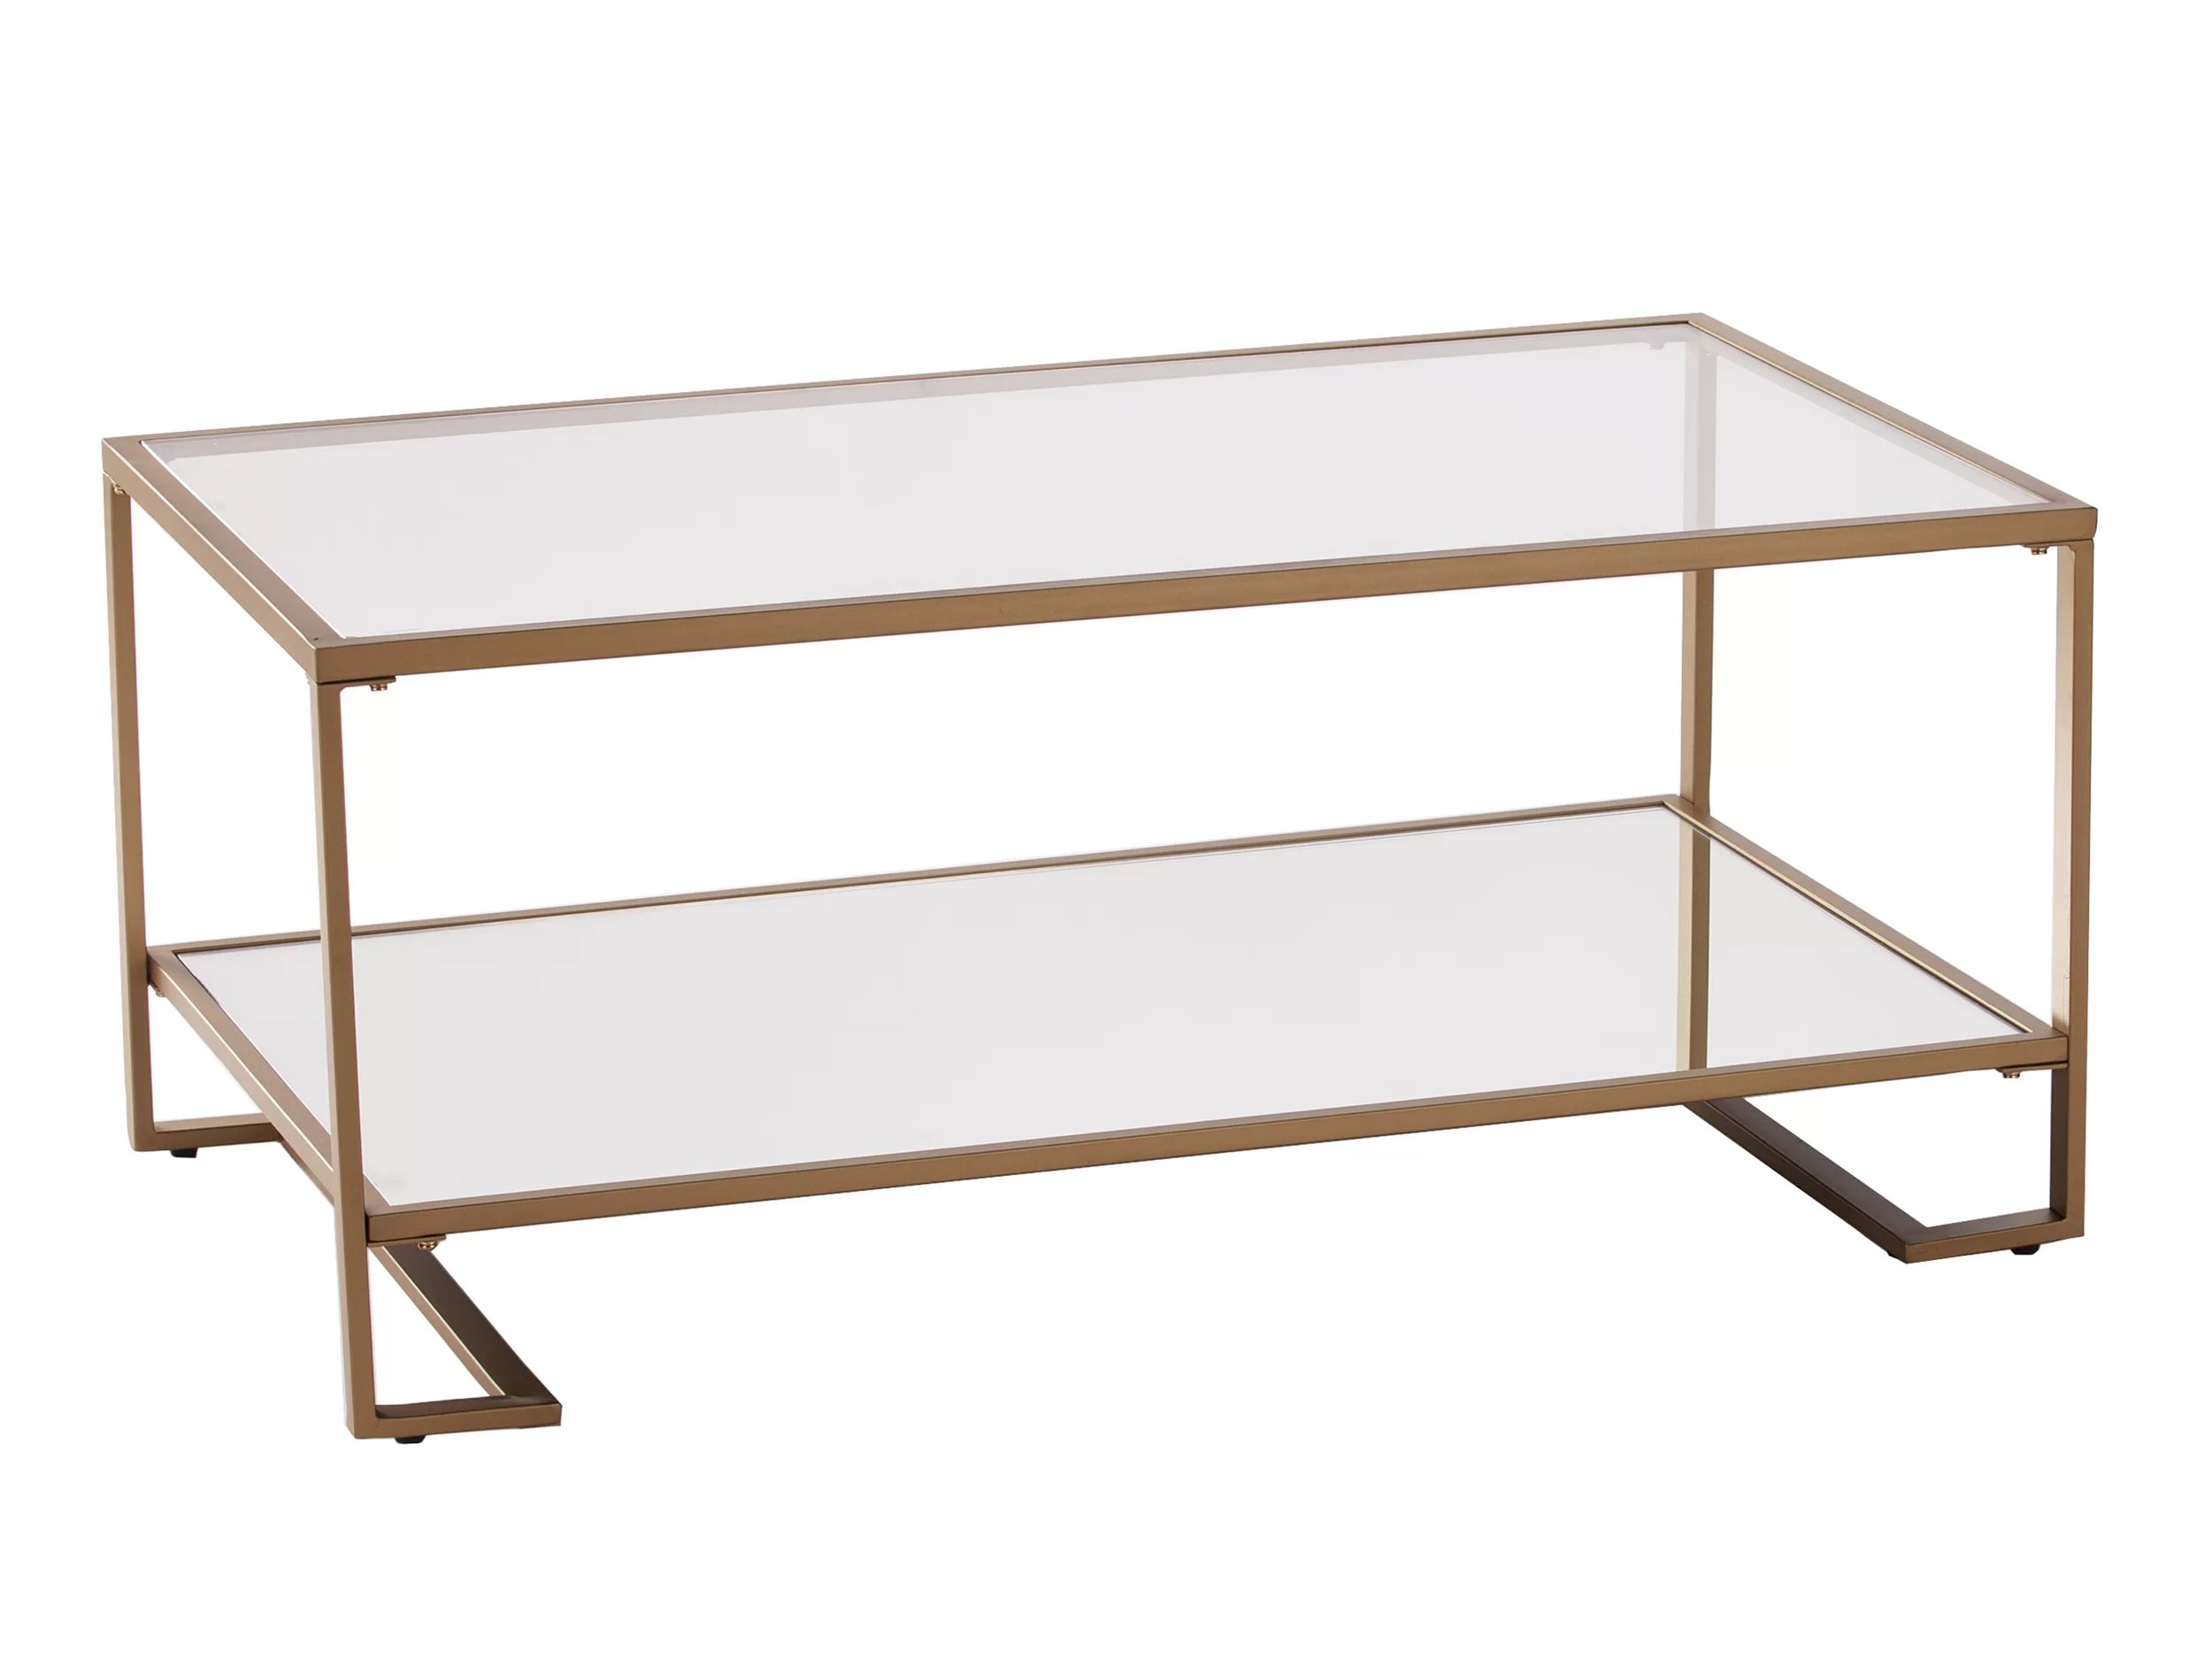 Callen Sled Coffee Table with Storage | Wayfair North America